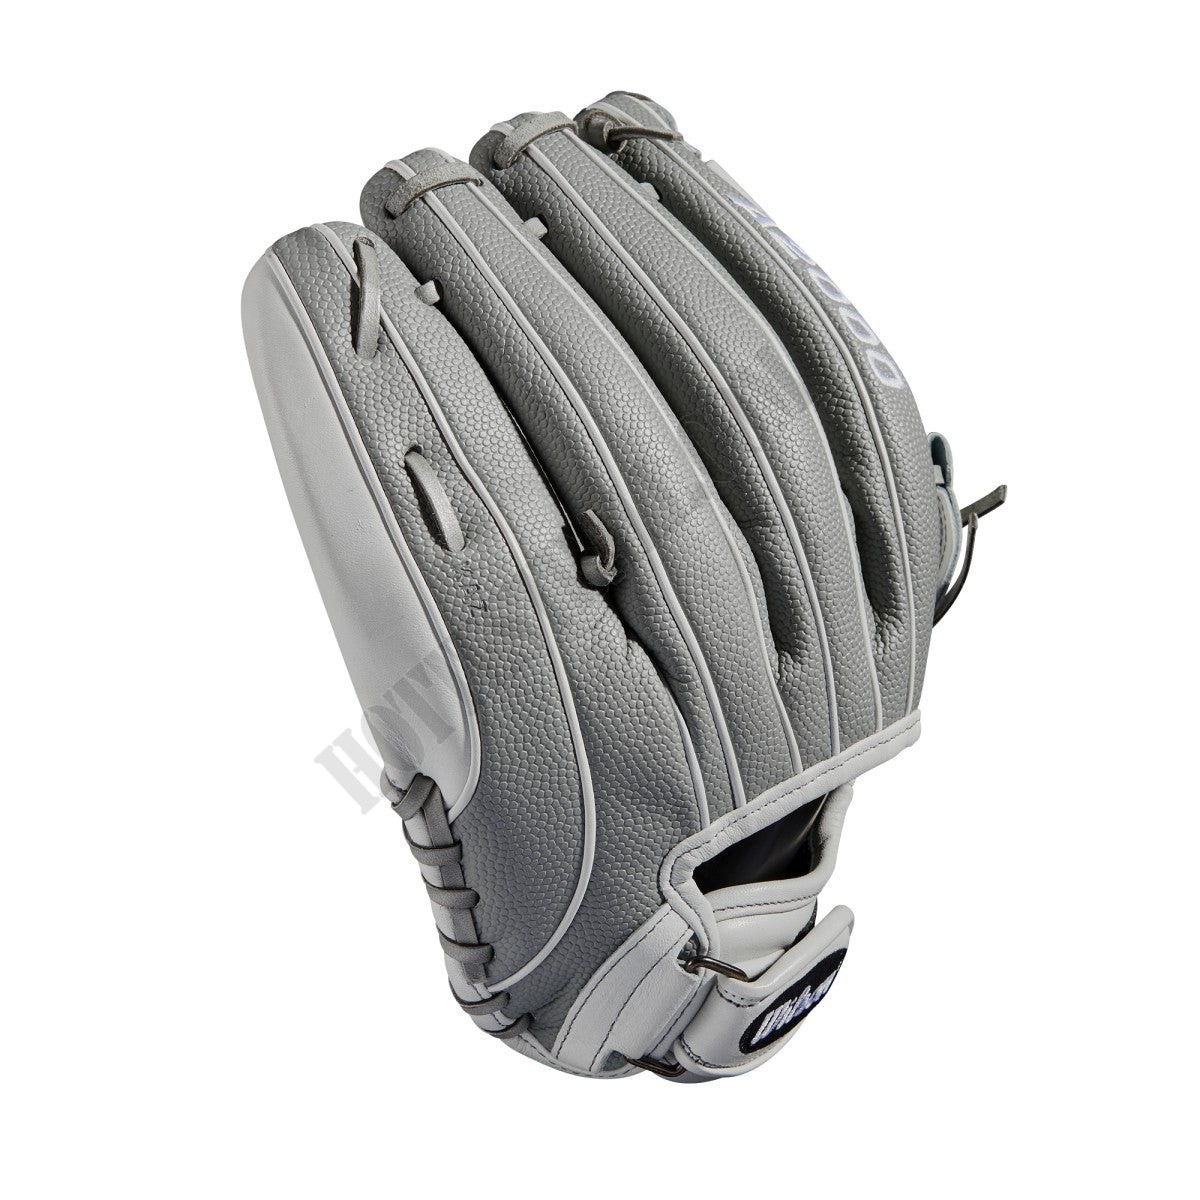 2019 A2000 P12 12" Pitcher's Fastpitch Glove ● Wilson Promotions - -4